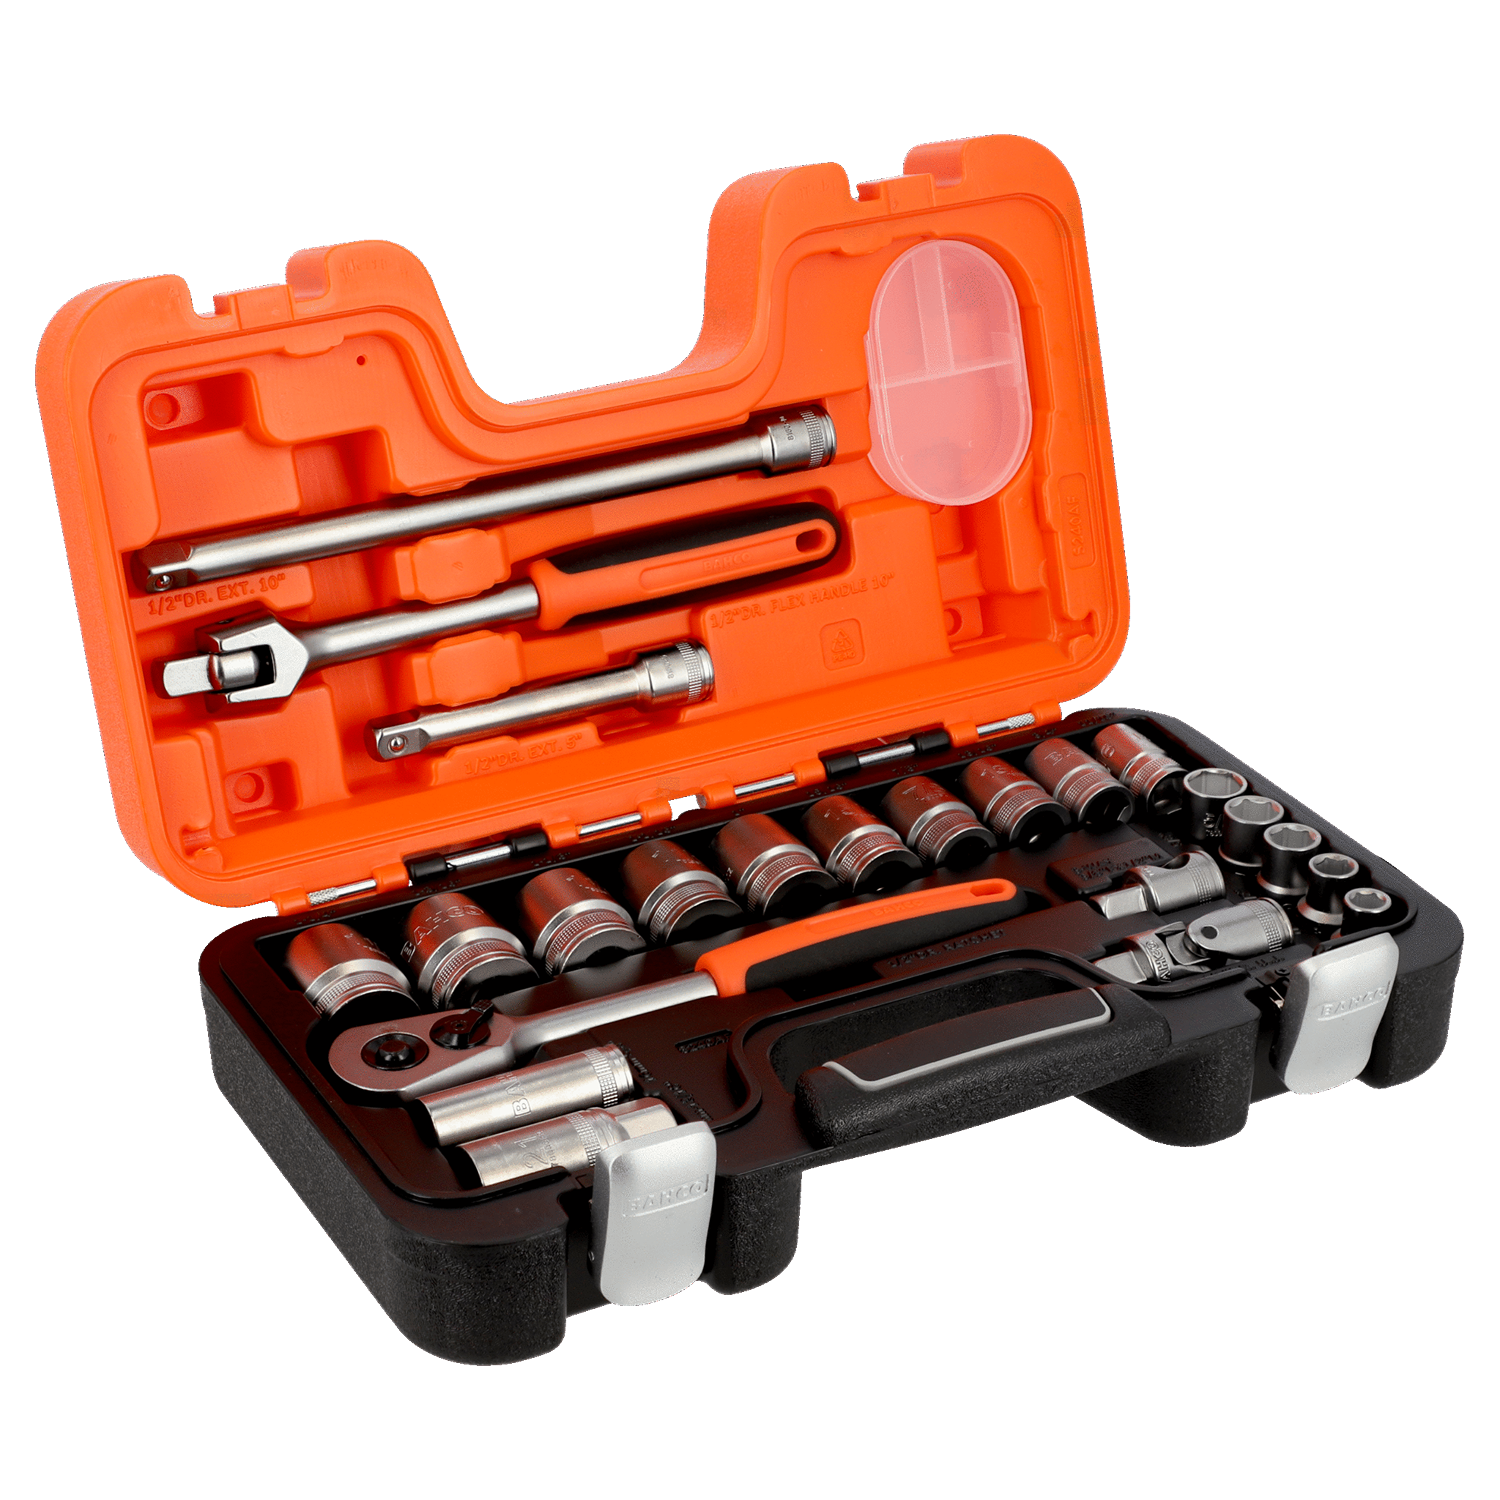 BAHCO S240AF 1/2” Square Drive Socket Set Imperial Hex Profile - Premium Socket Set from BAHCO - Shop now at Yew Aik.